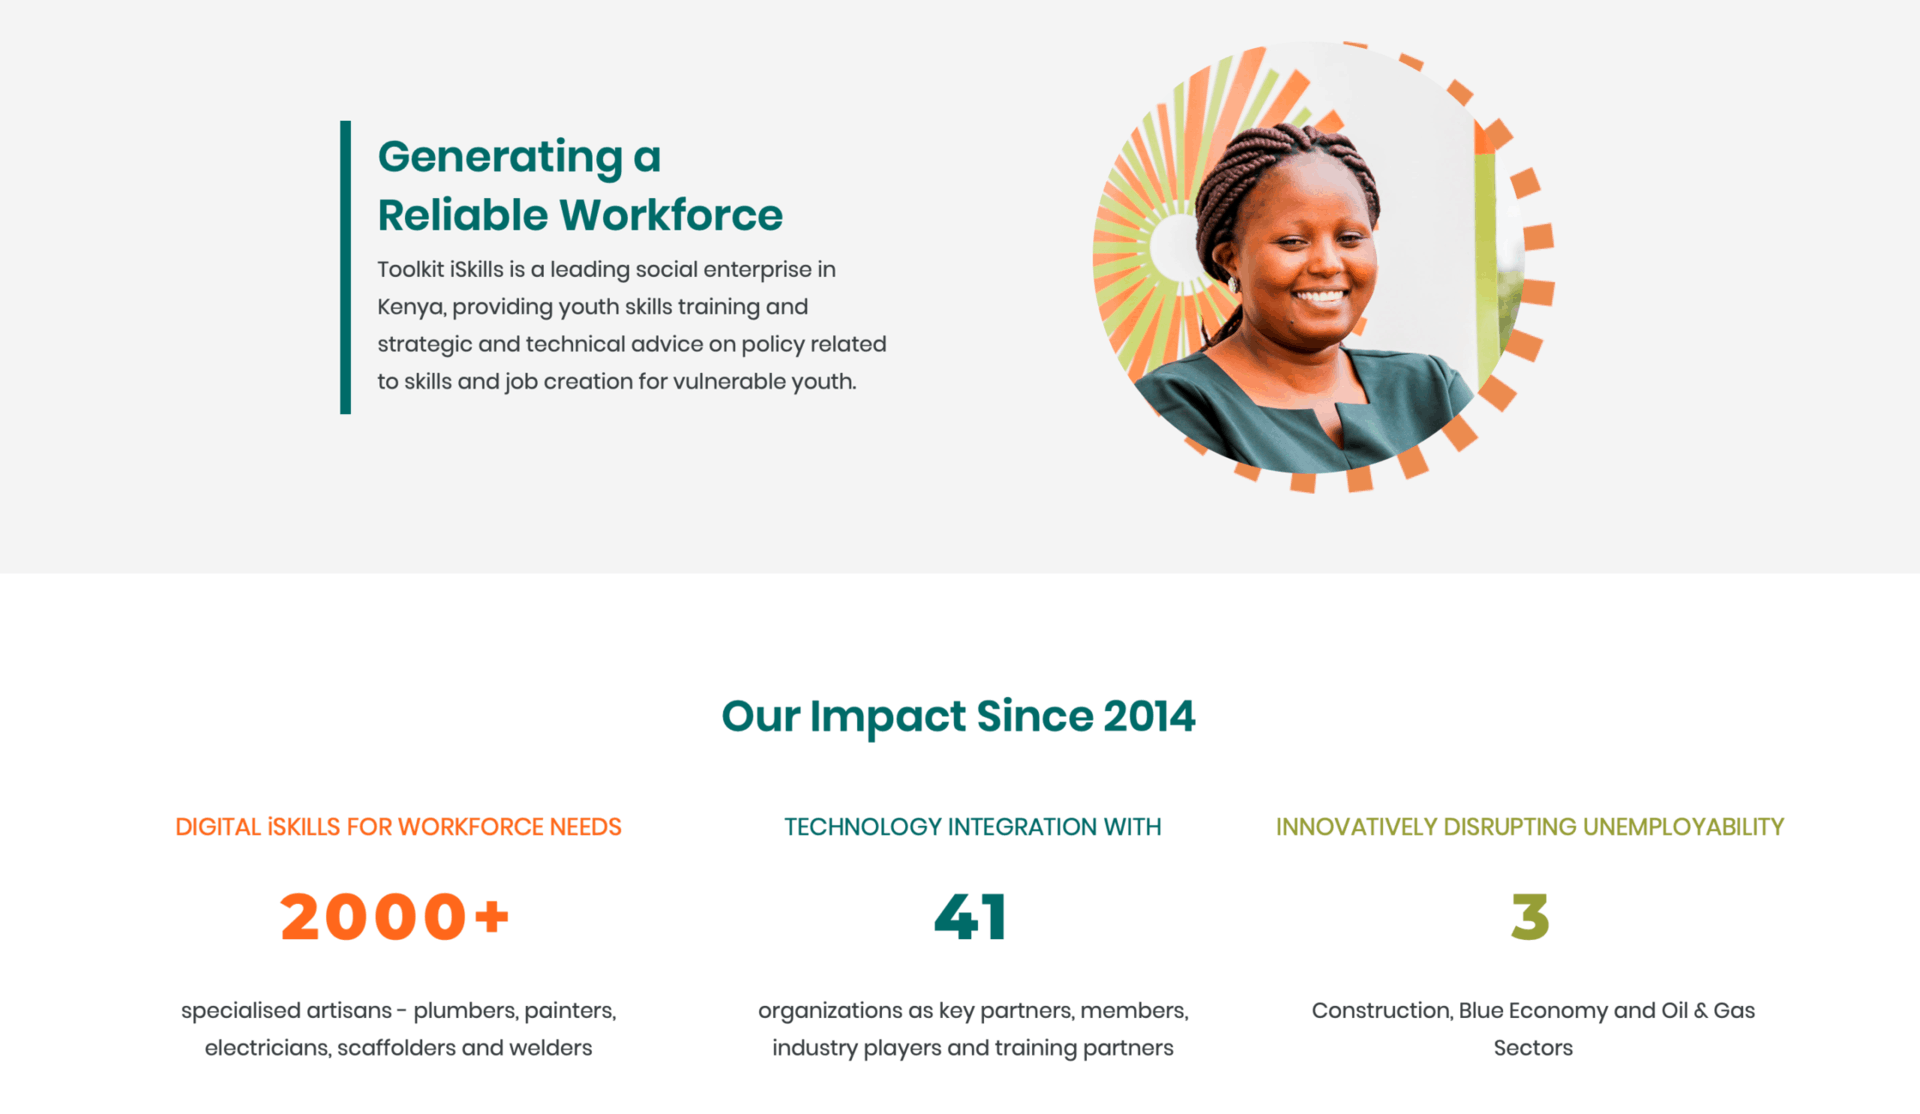 Testimonial page highlighting the impact. Top half page in gray with smiling portrait of a Kenyan woman artisan. Bottom half has a white background, stating "Our impact since 2014"